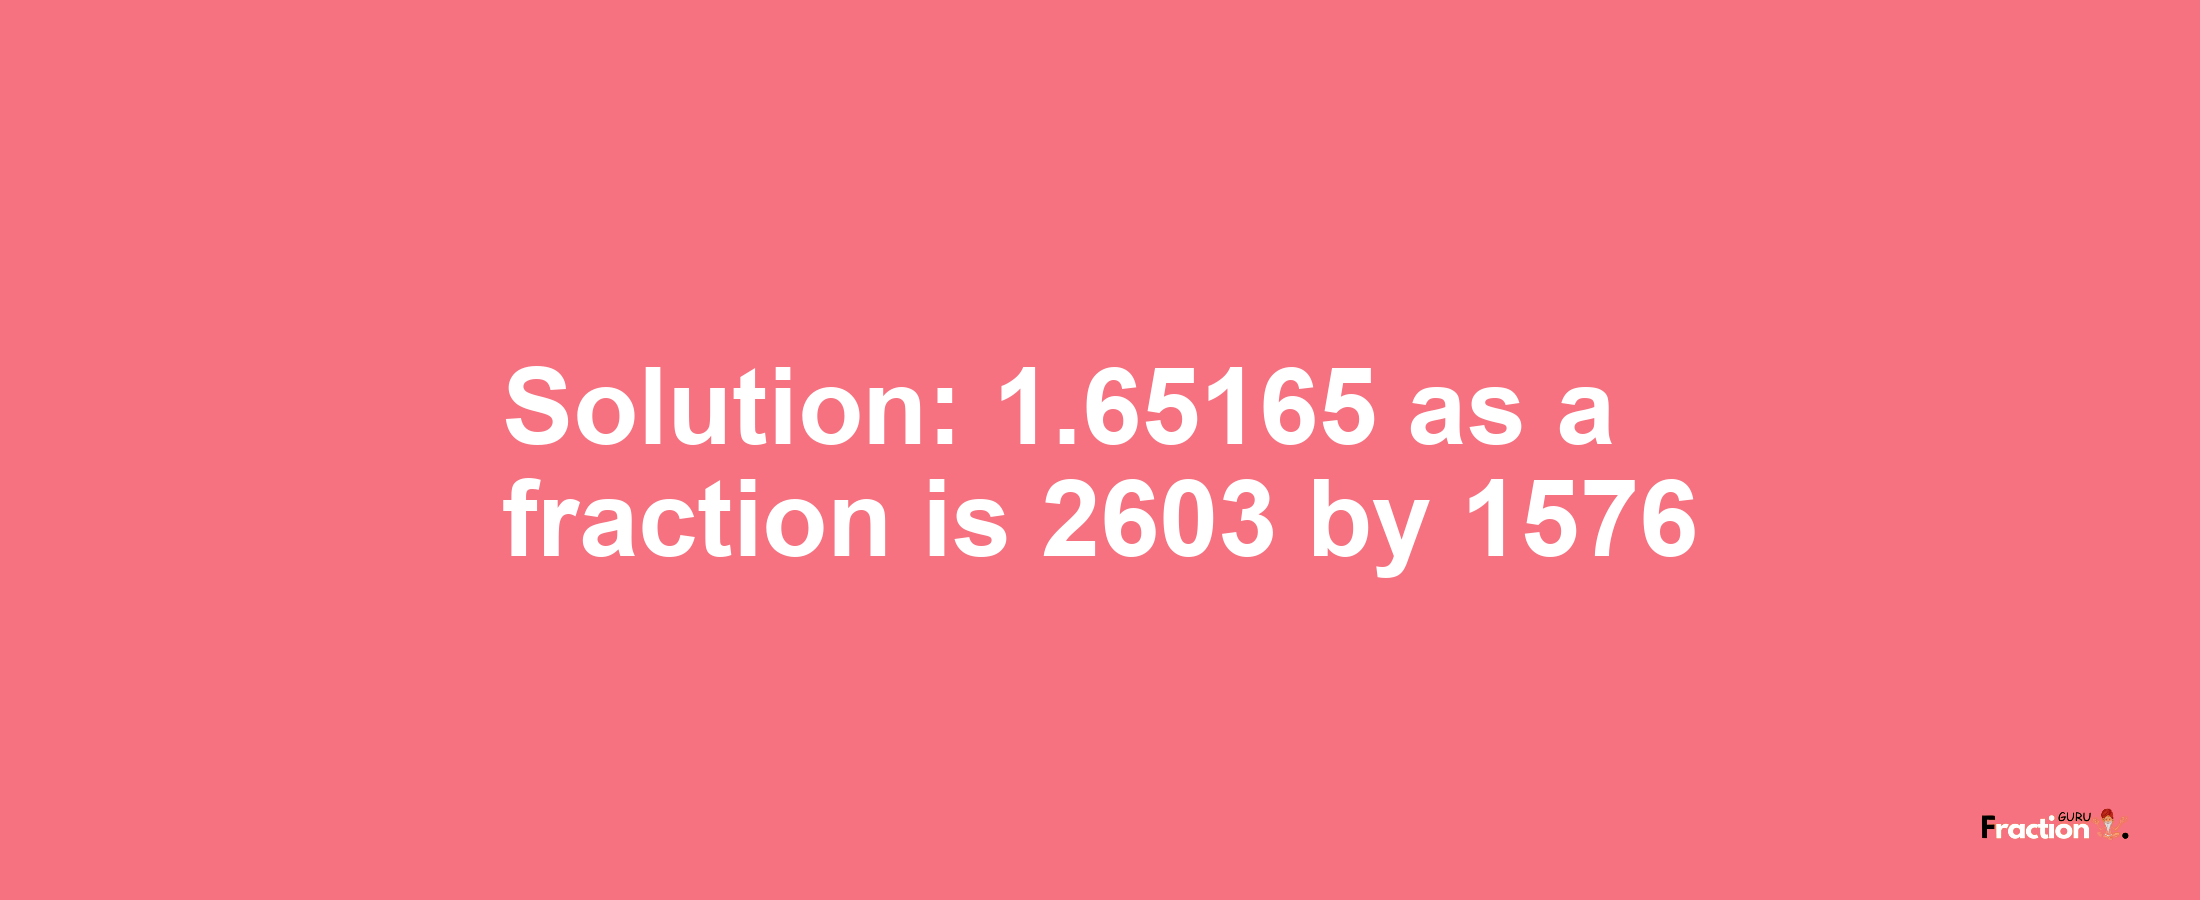 Solution:1.65165 as a fraction is 2603/1576